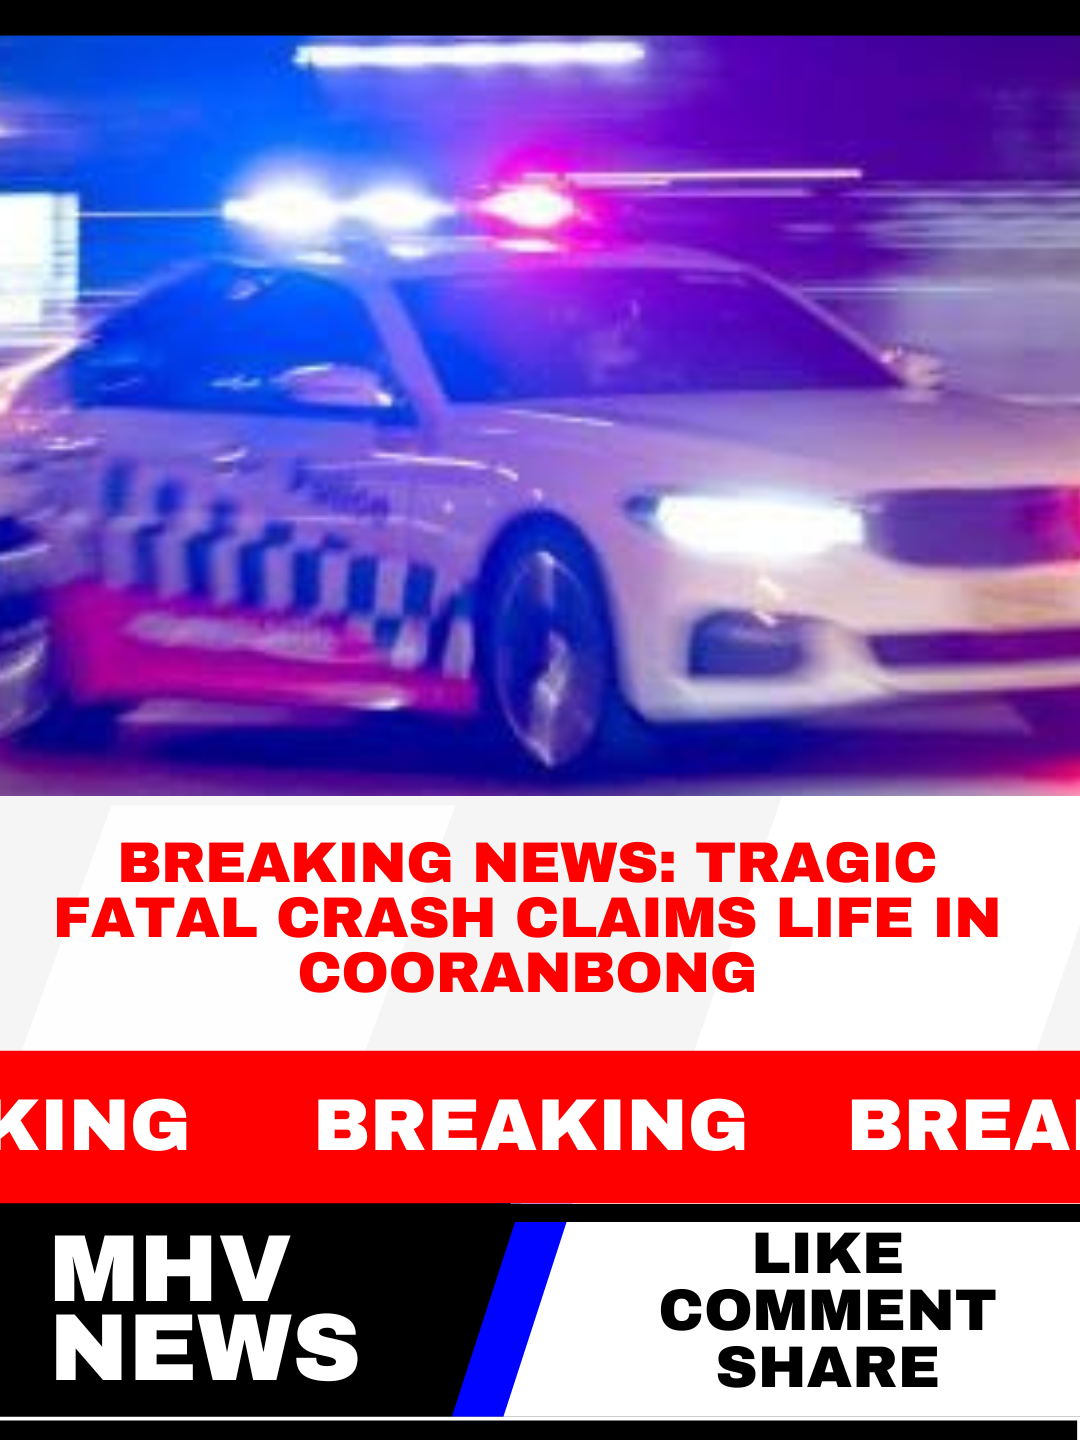 You are currently viewing Breaking News: Tragic Fatal Crash Claims Life in Cooranbong